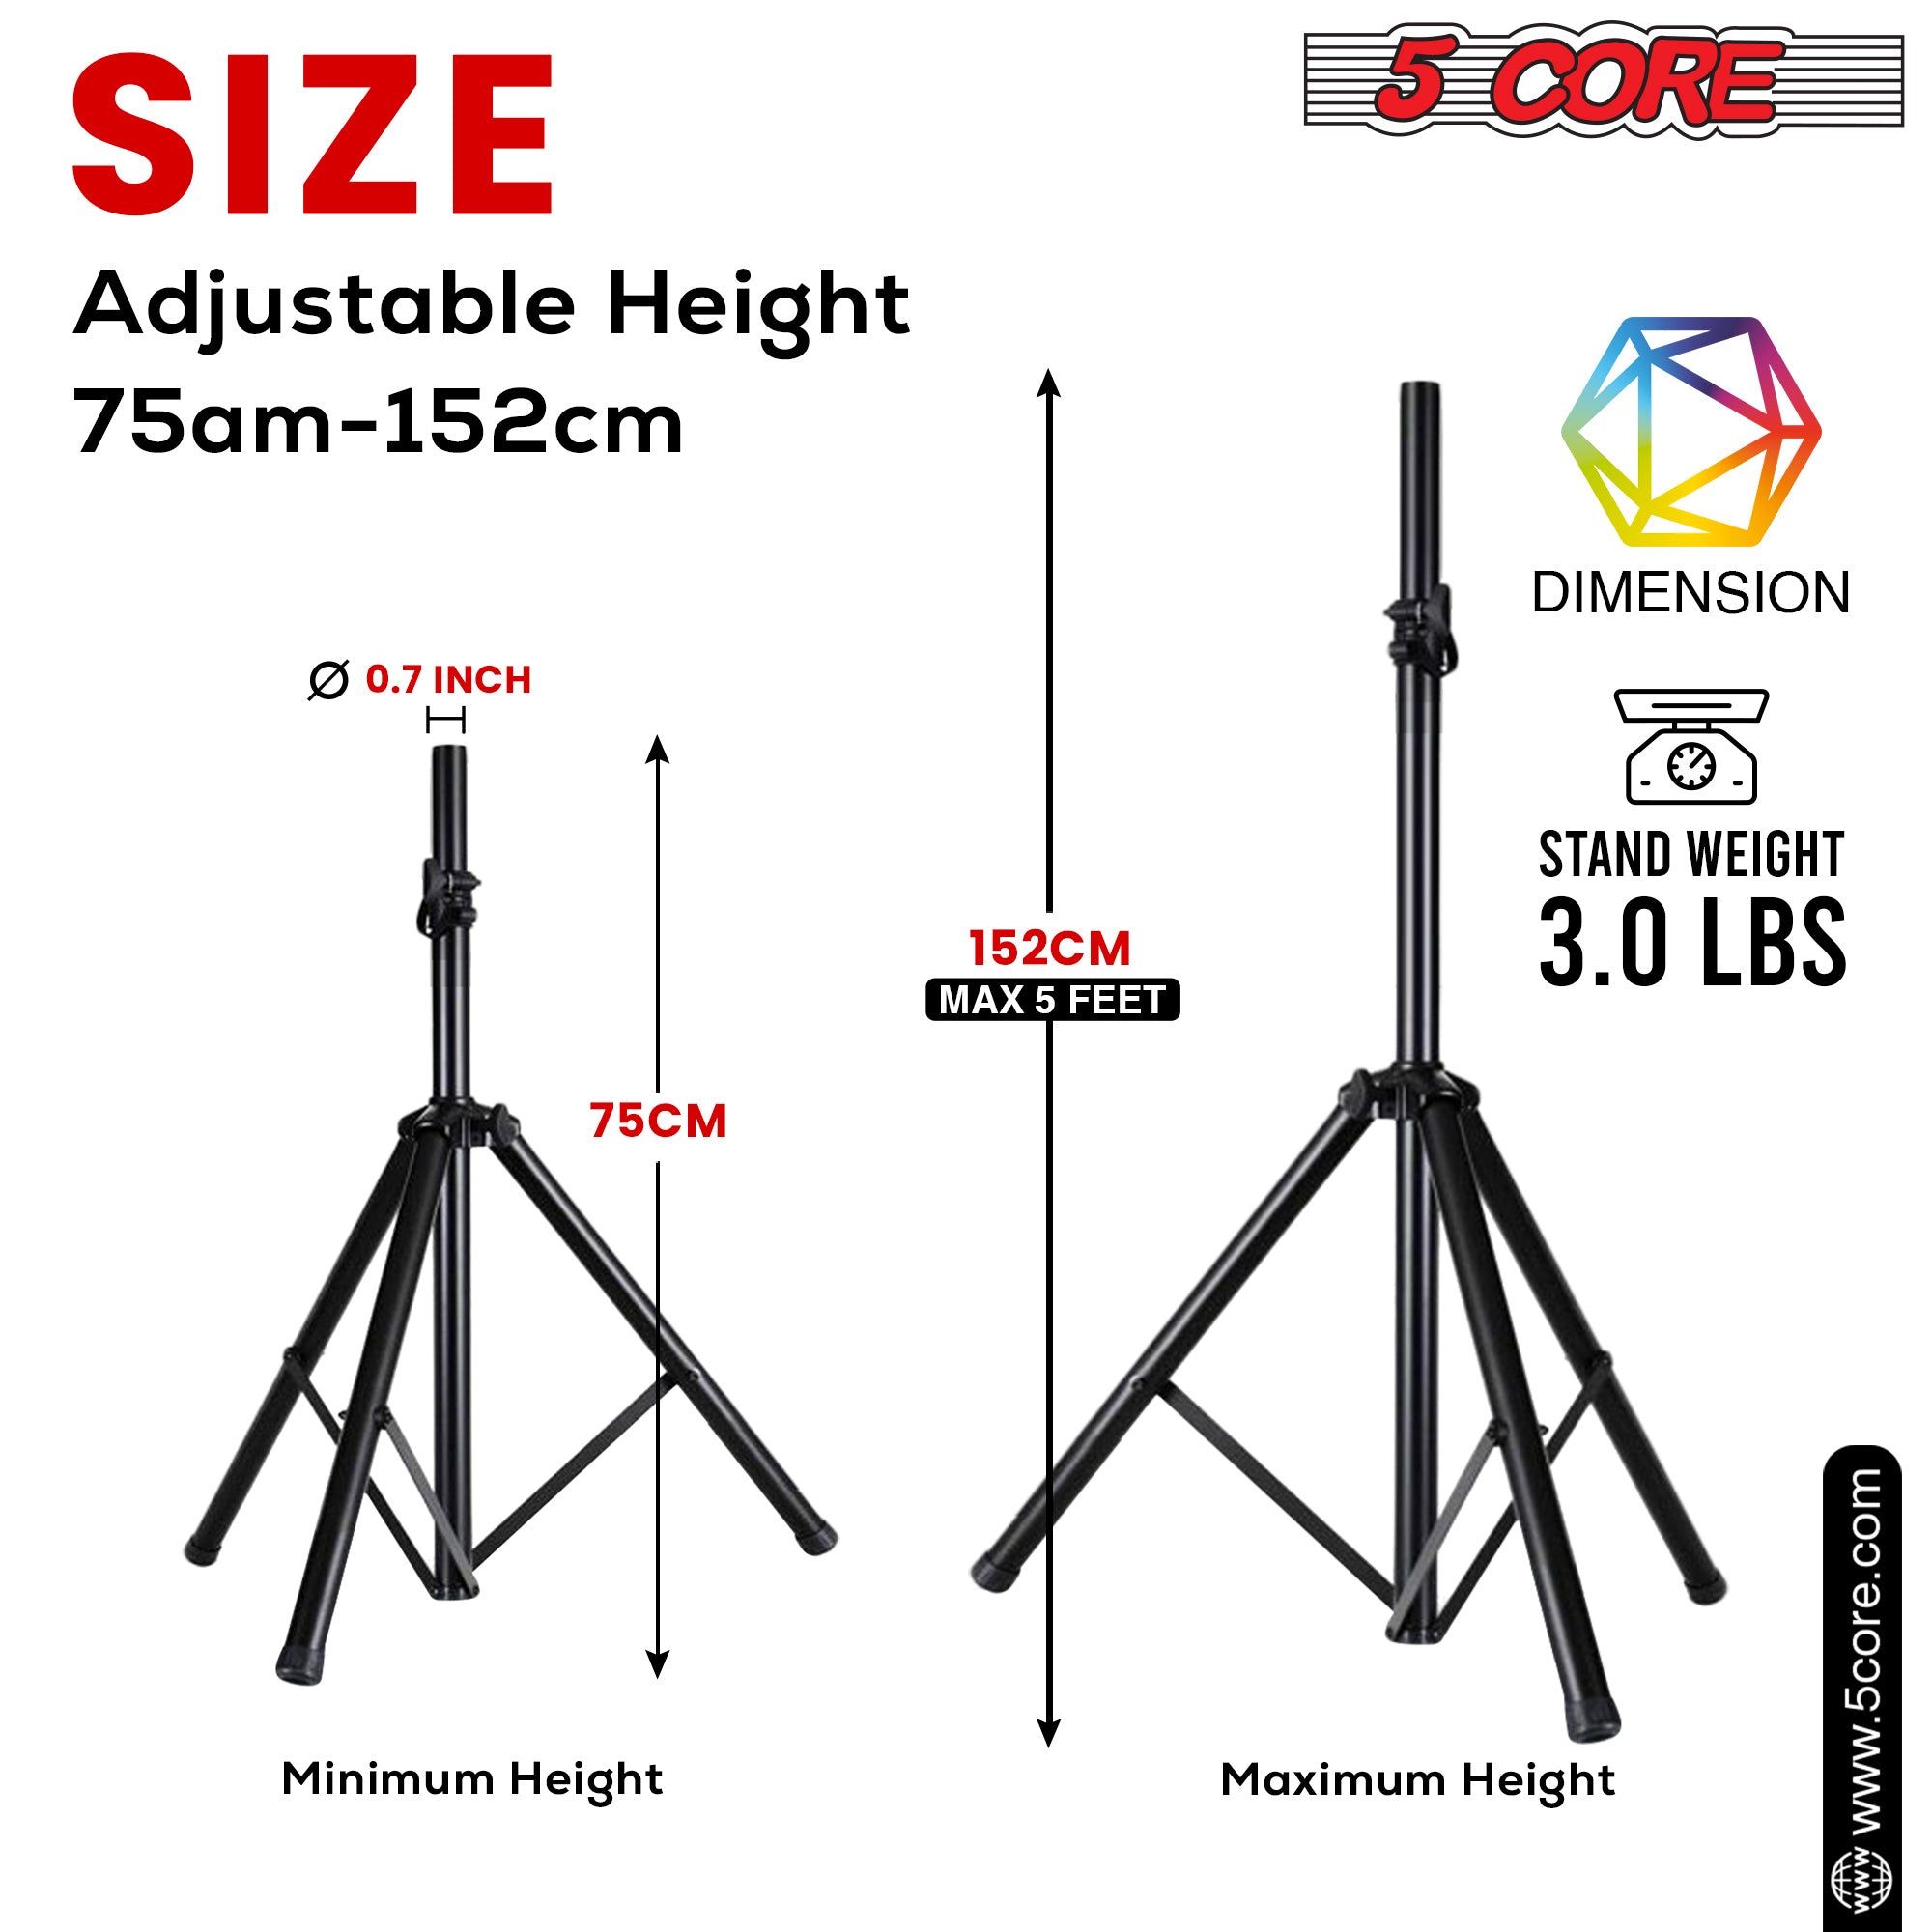 5 Core PA Speaker Stands Adjustable Height Professional Heavy Duty DJ Tripod with Mounting Bracket Extend from 68 - 152 CM Black SS HD 1PK 5FT